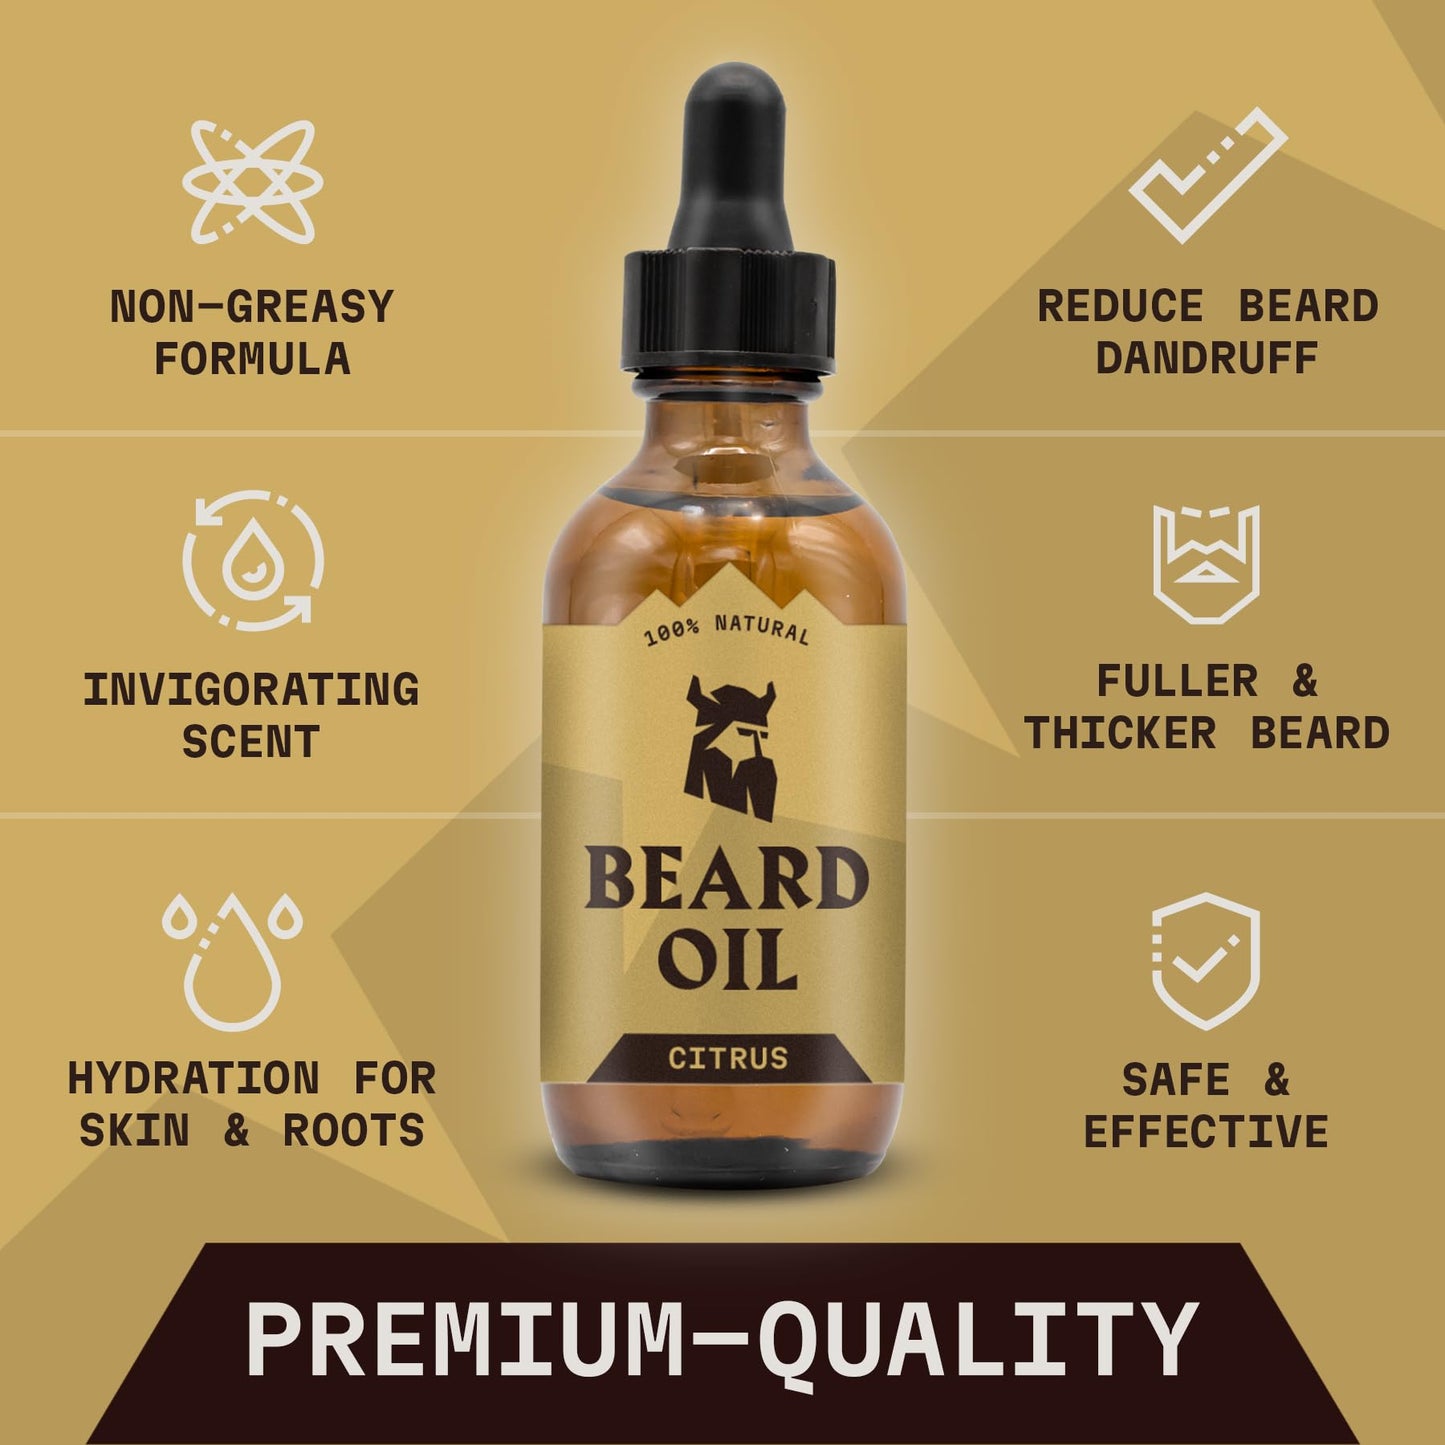 Striking Viking Scented Beard Oil Conditioner for Men (Large 2 oz.) - Naturally Derived Formula with Tea Tree, Argan and Jojoba Oils with Citrus Scent - Softens, Smooths & Strengthens Beard Growth